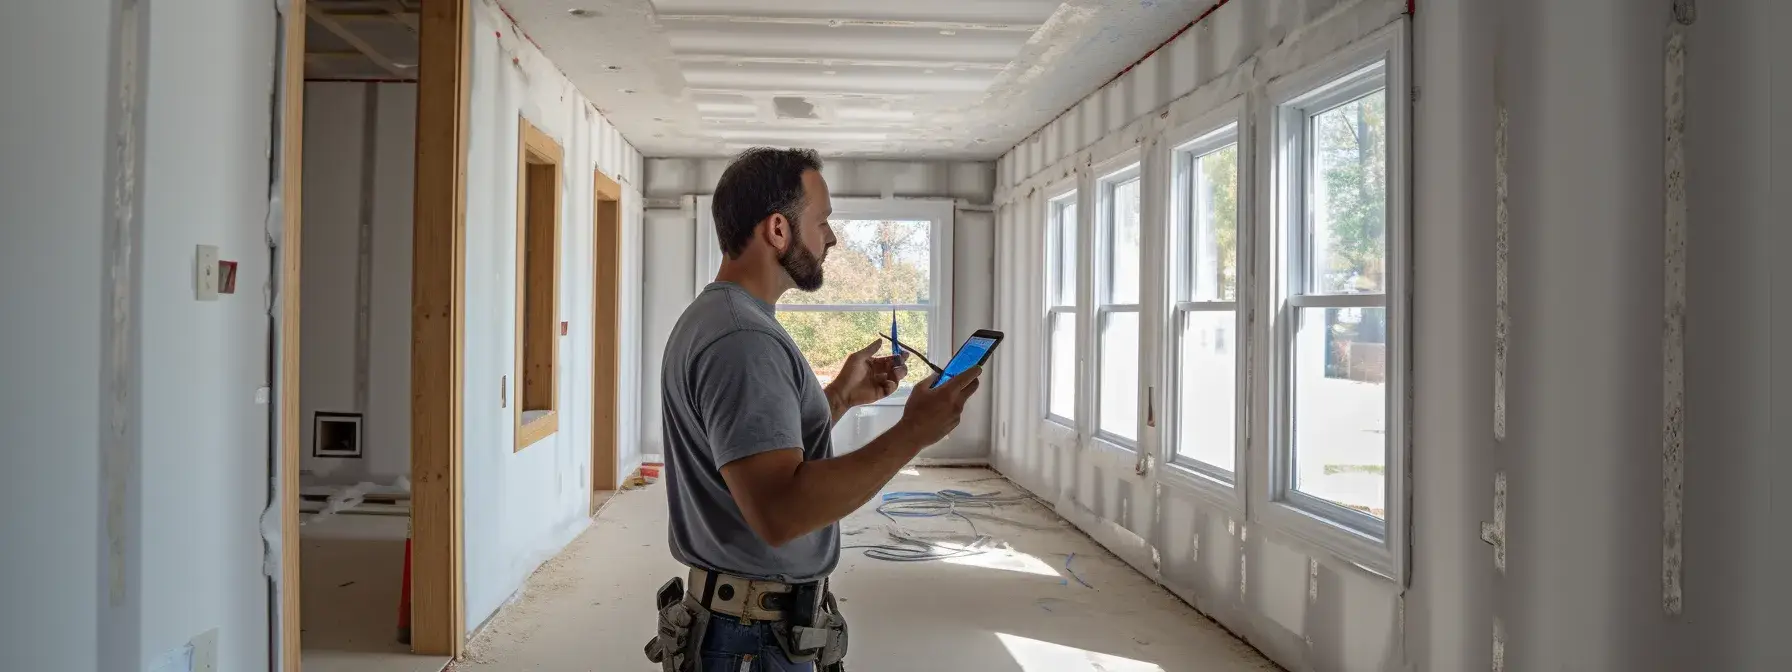 a homeowner examines certifications and online reviews while choosing a drywall company.